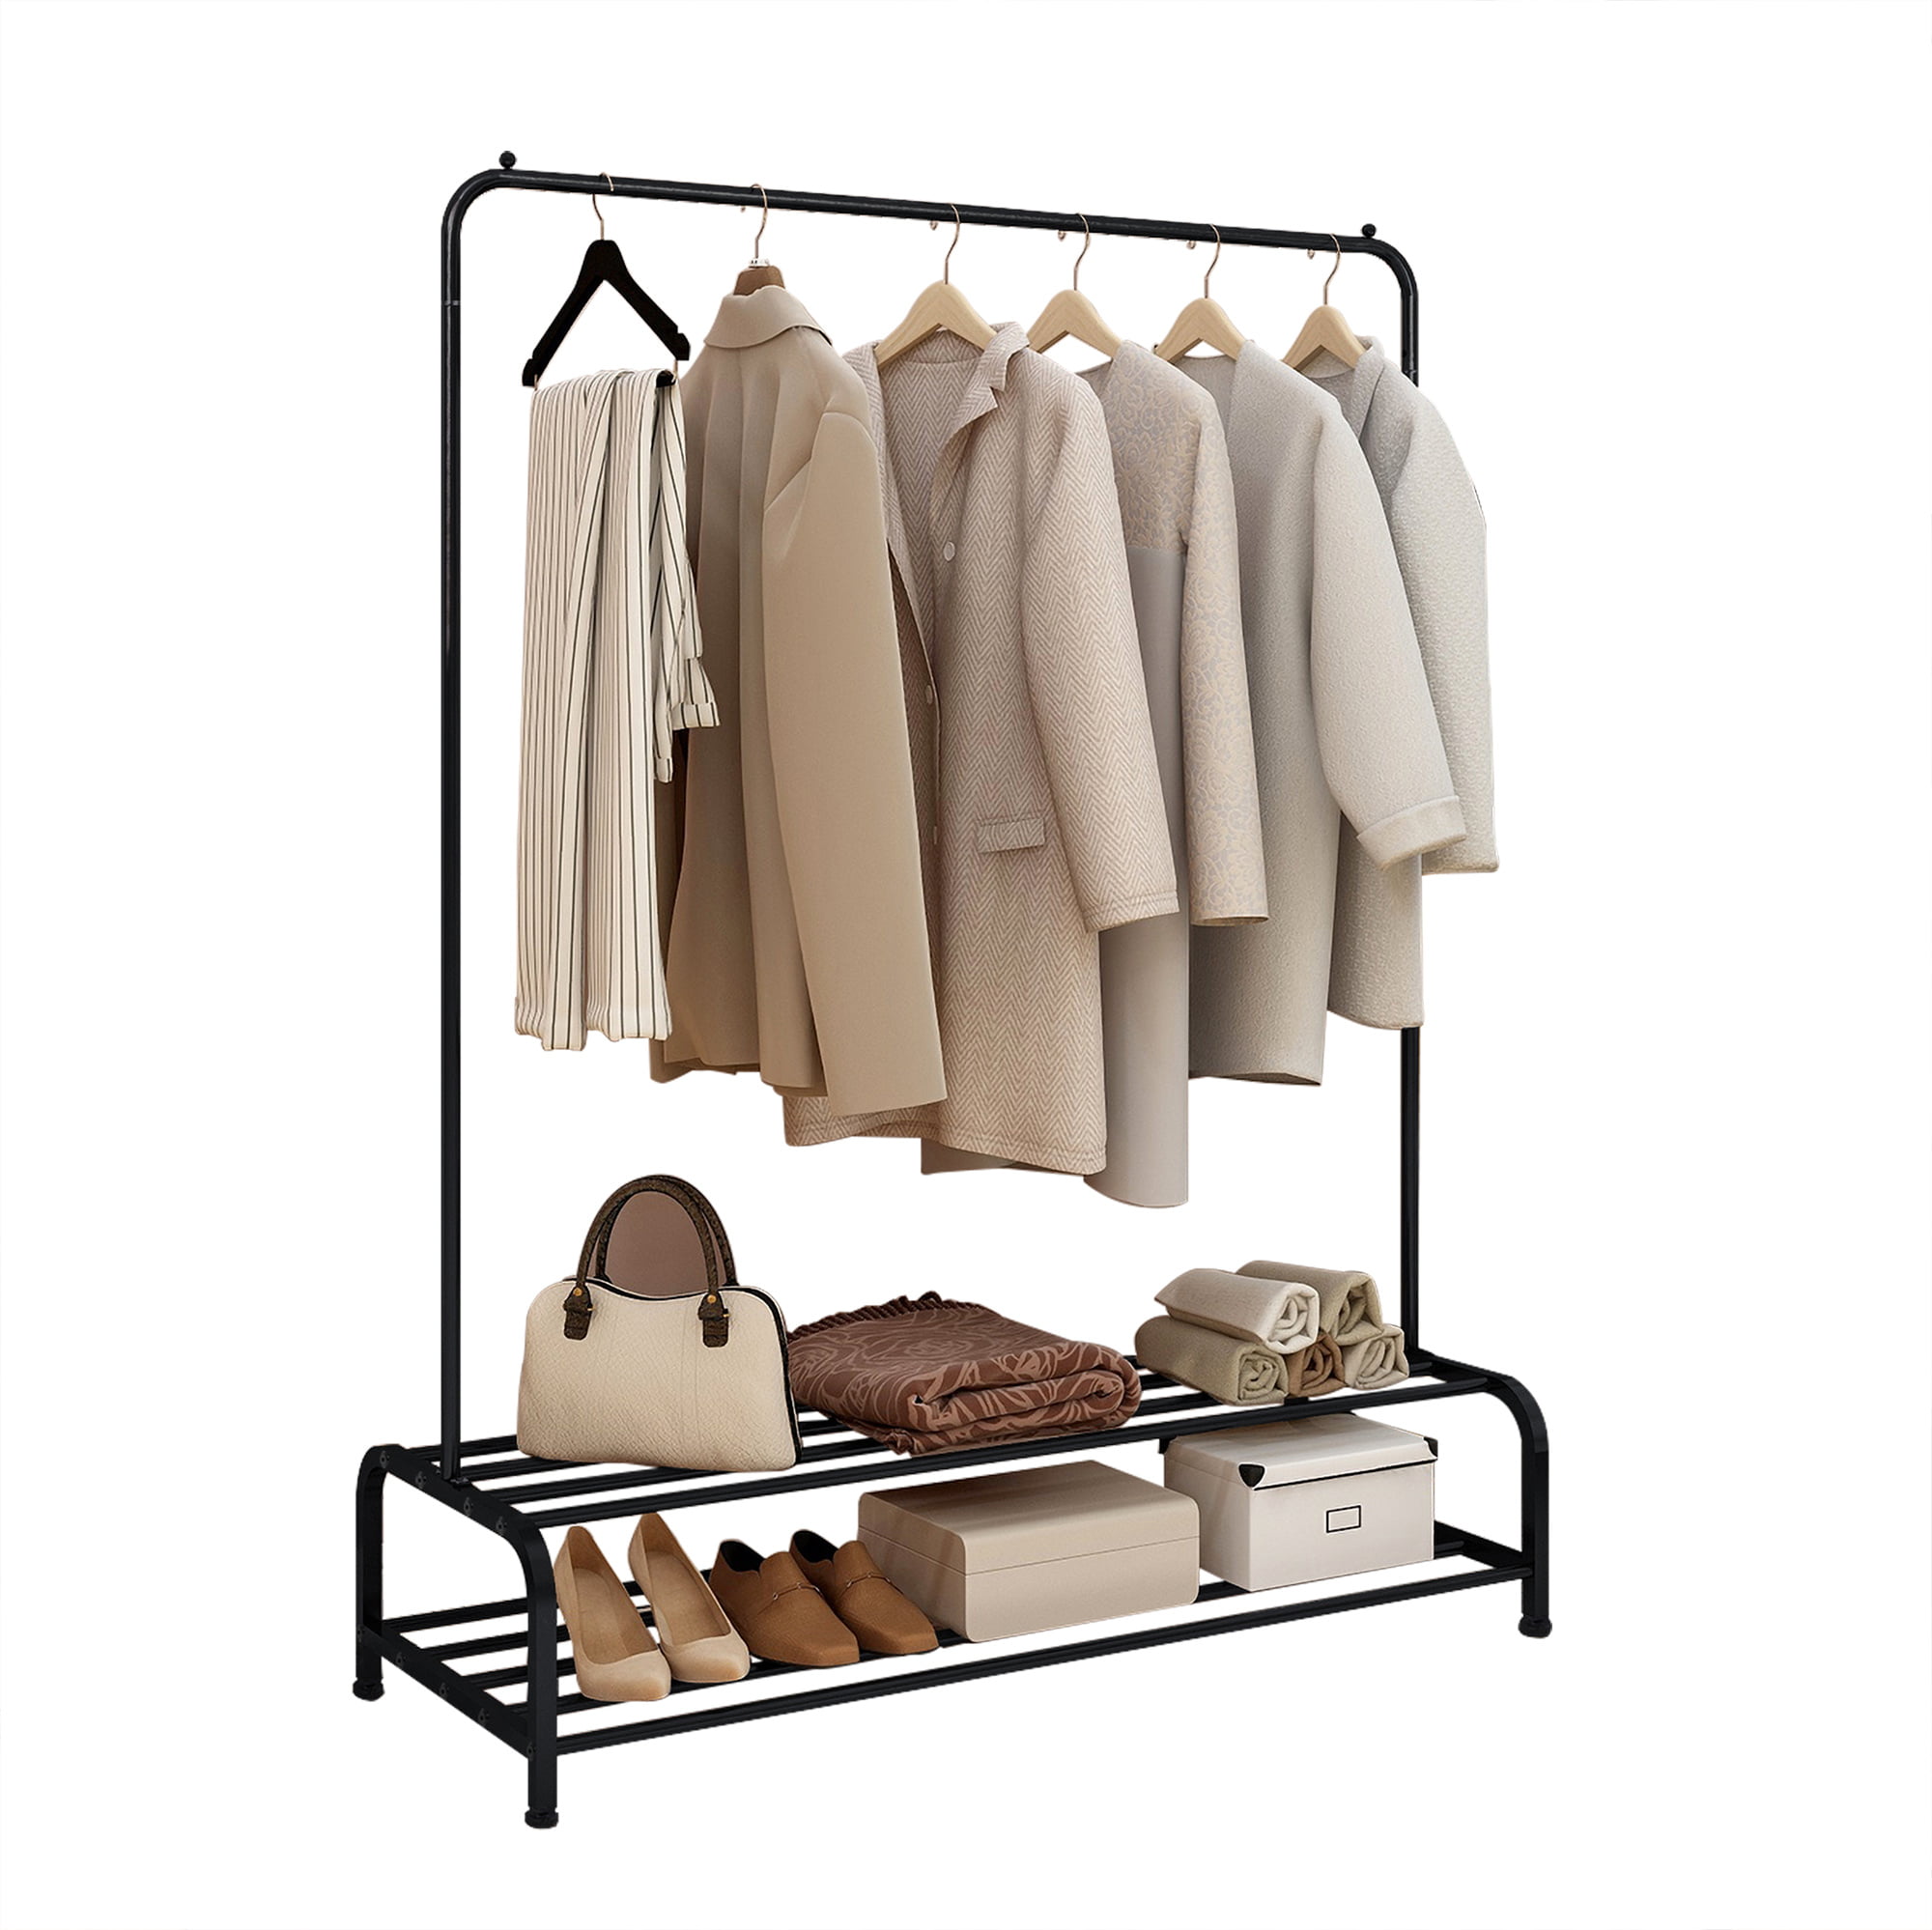 Heavy Duty Clothes Garment Rail Rack Hanging Display Stand Shoes Storage Shelves 